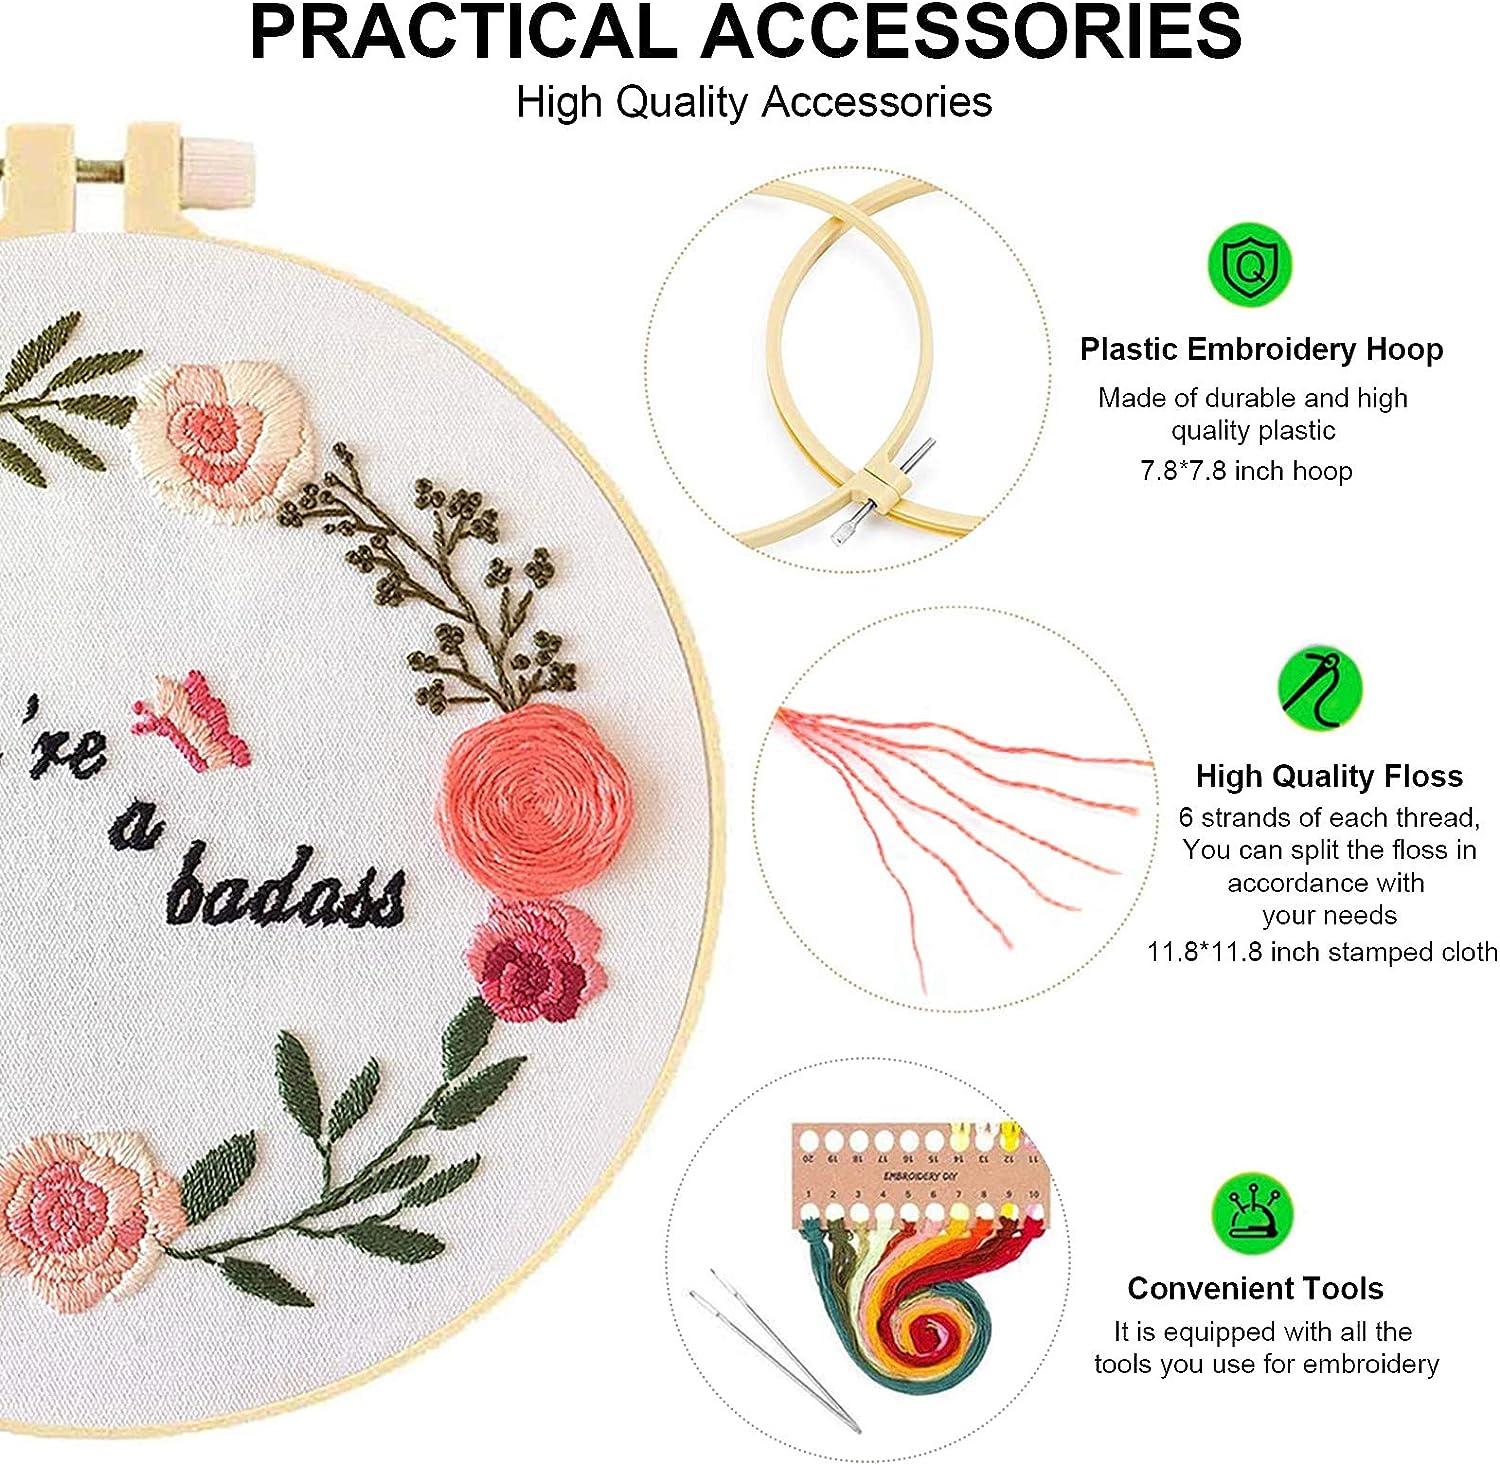 ORANDESIGNE Funny Embroidery Kit for Beginners Stamped Cross Stitch Kits  for Beginners Adults Patterned Needlepoint Embroidery Hoops Cloth Color  Thread Floss Flowers Plants Cactus A Pink 1